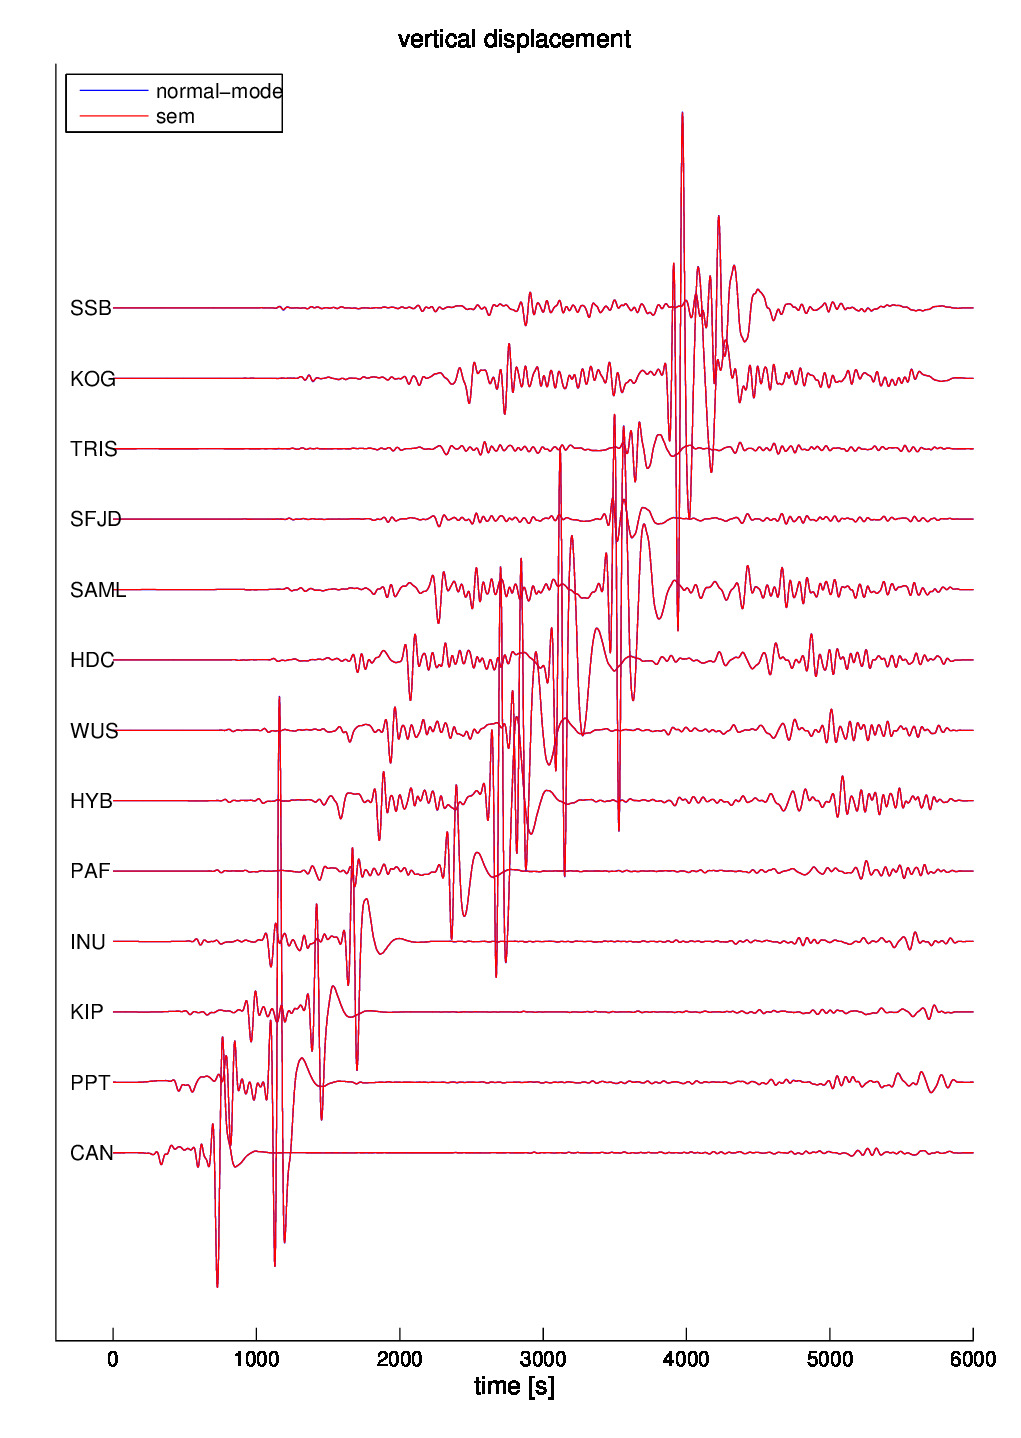 Normal-mode (blue) and SEM (red) vertical displacements in isotropic PREM considering the effects of self-gravitation but not attenuation for 13 stations at increasing distance from the 1999 November 26th Vanuatu event located at 15 km depth. The SEM computation is accurate for periods longer than 17 s. The seismograms have been filtered between 50 s and 500 s. The station names are indicated on the left. 